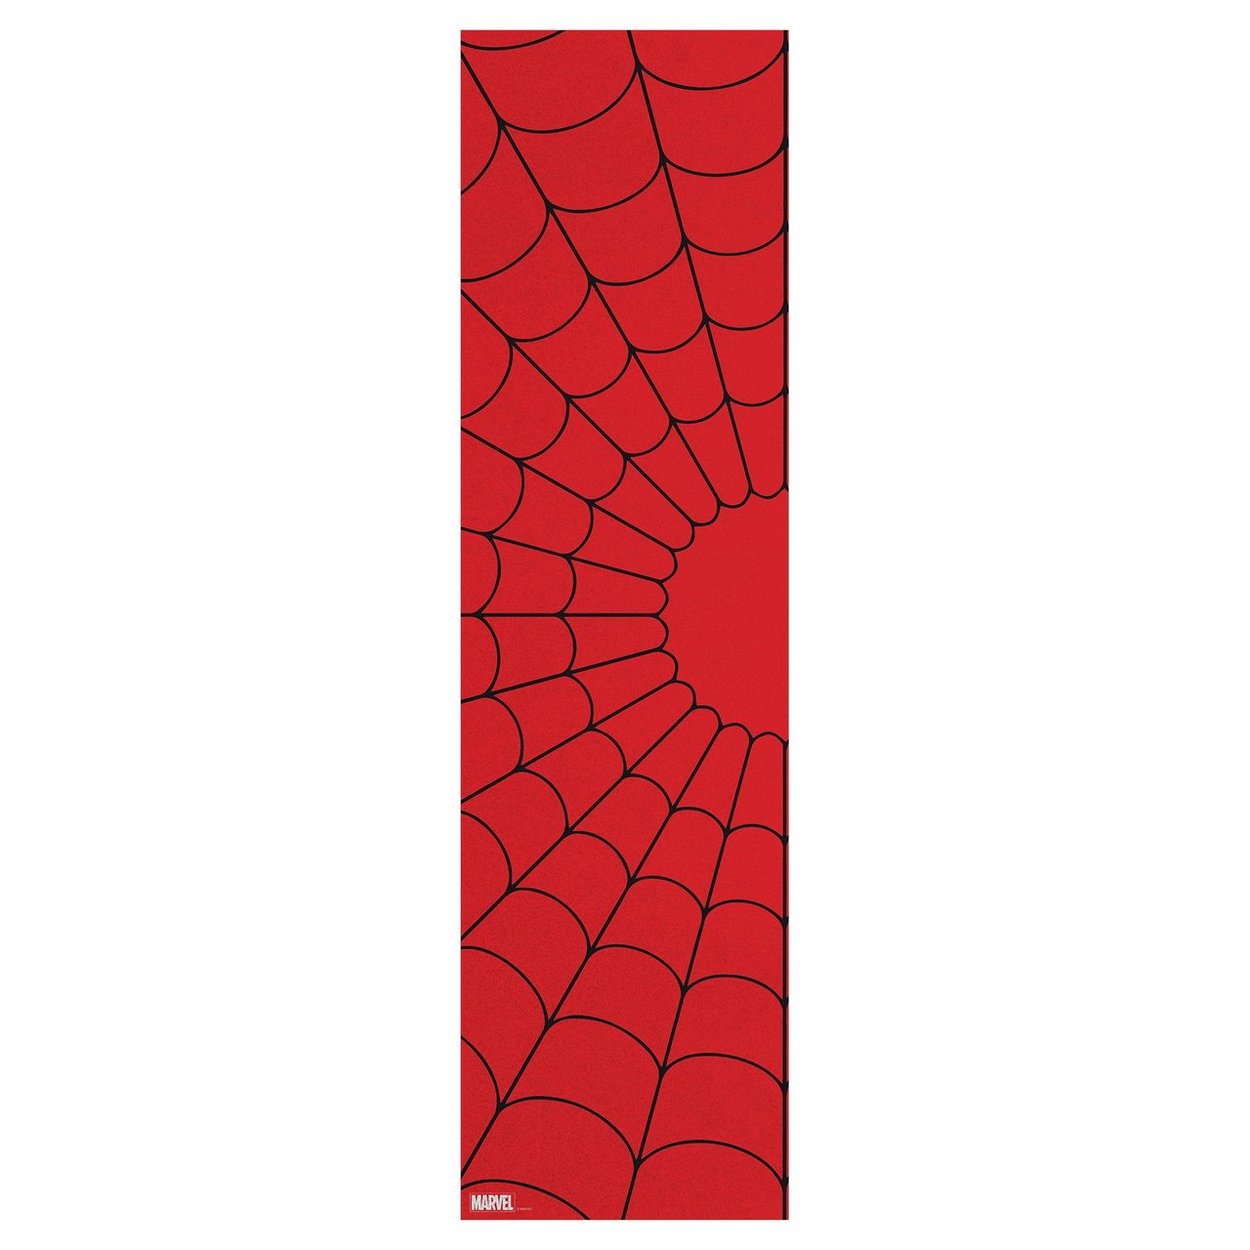 Grizzly Torey Pudwill x Marvel Spider-man Webbed Skateboard Griptape